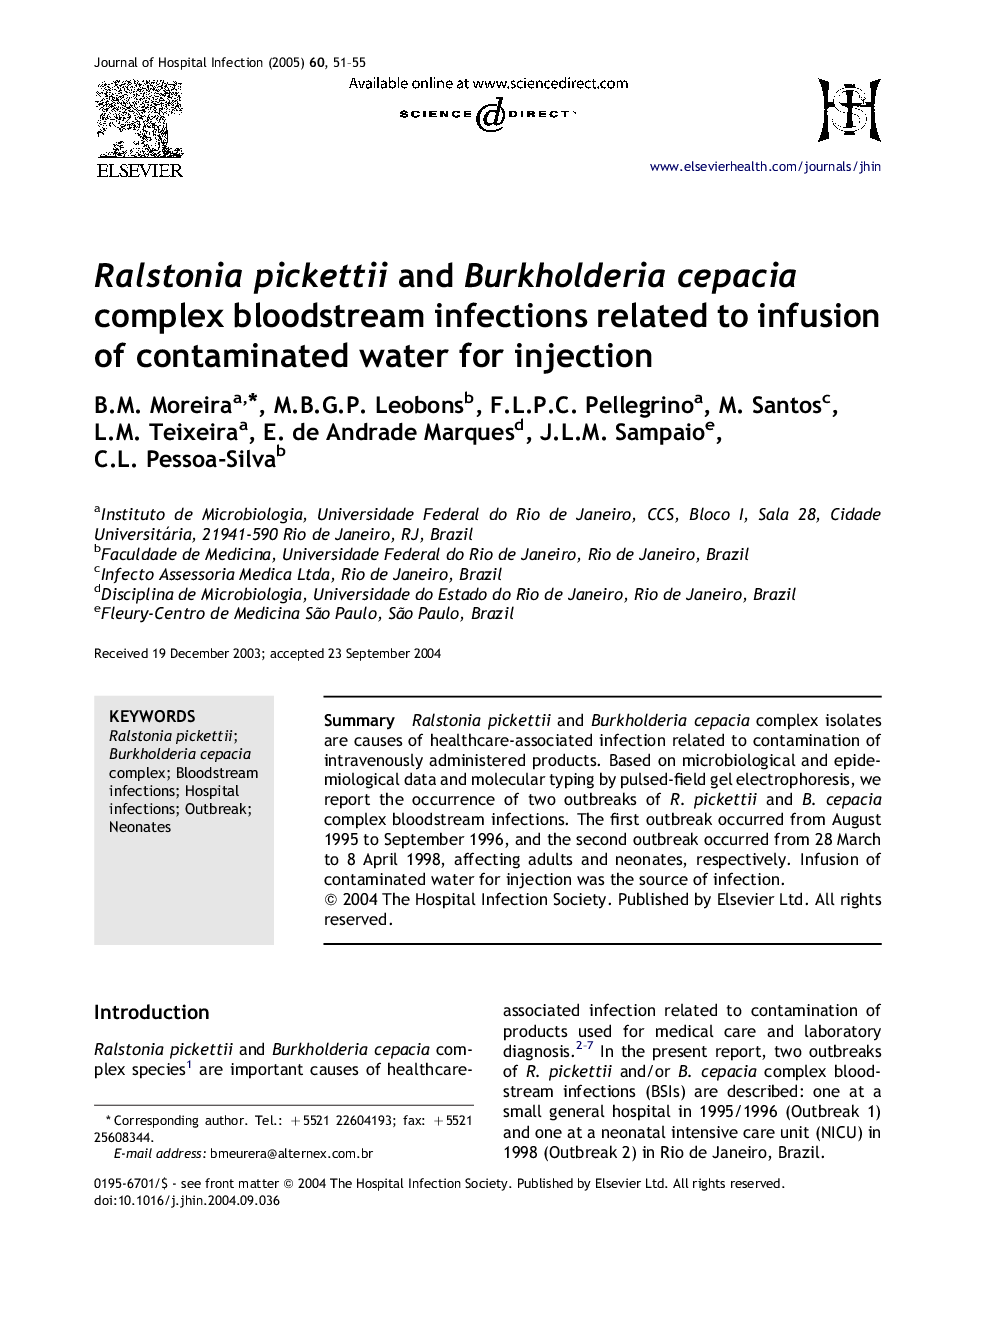 Ralstonia pickettii and Burkholderia cepacia complex bloodstream infections related to infusion of contaminated water for injection